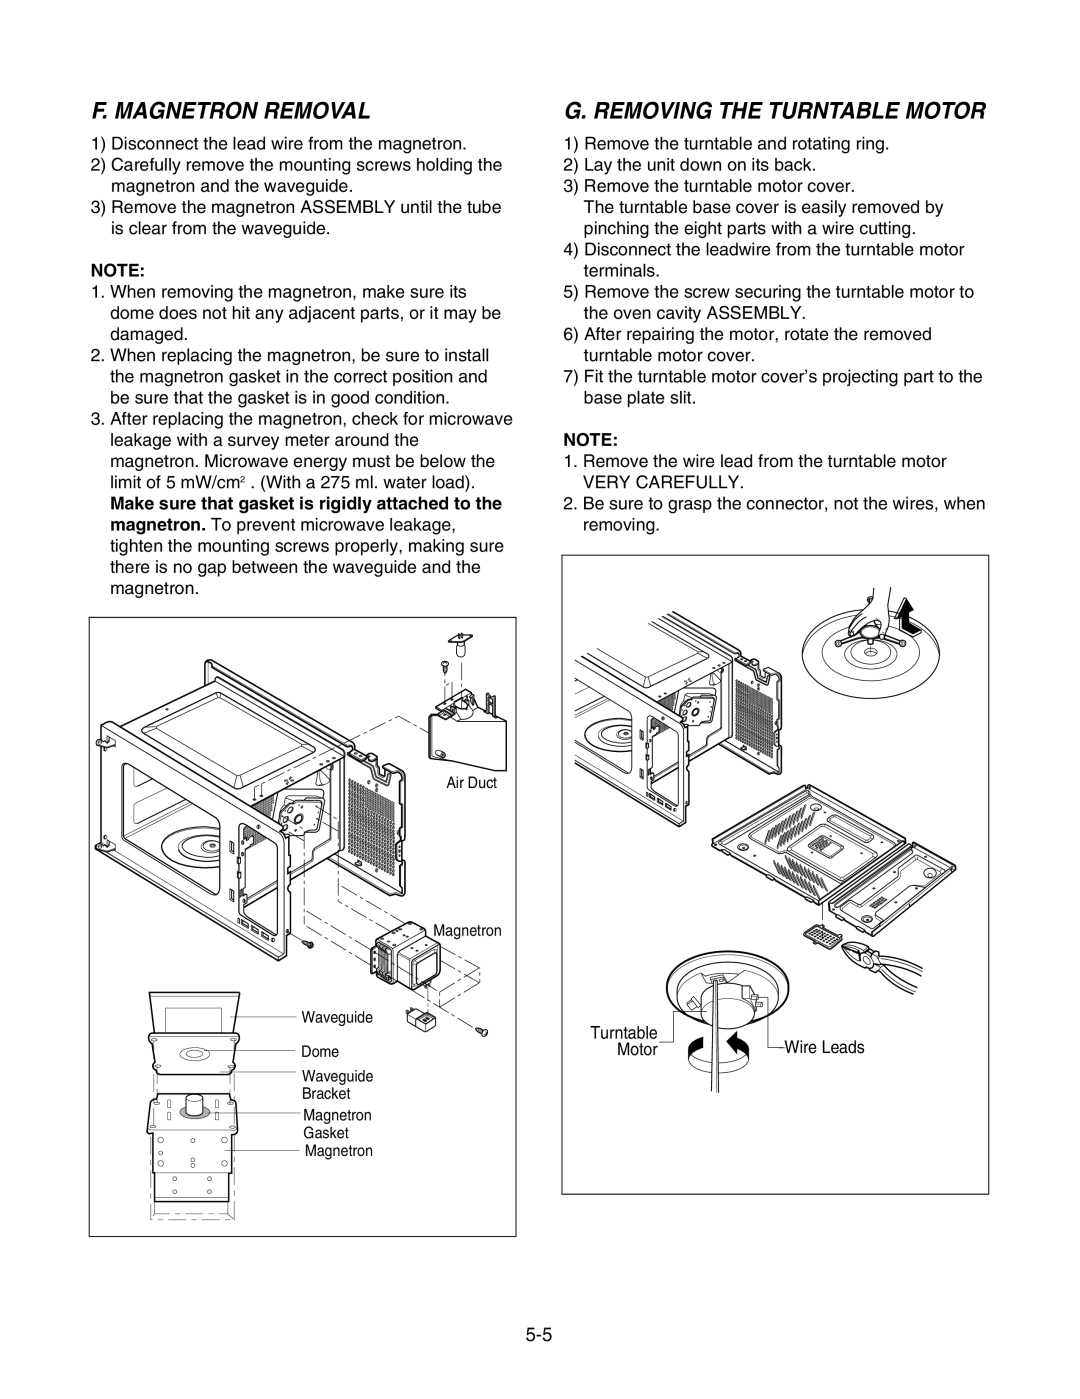 GE LMAB1240ST service manual F. Magnetron Removal, G. Removing The Turntable Motor 